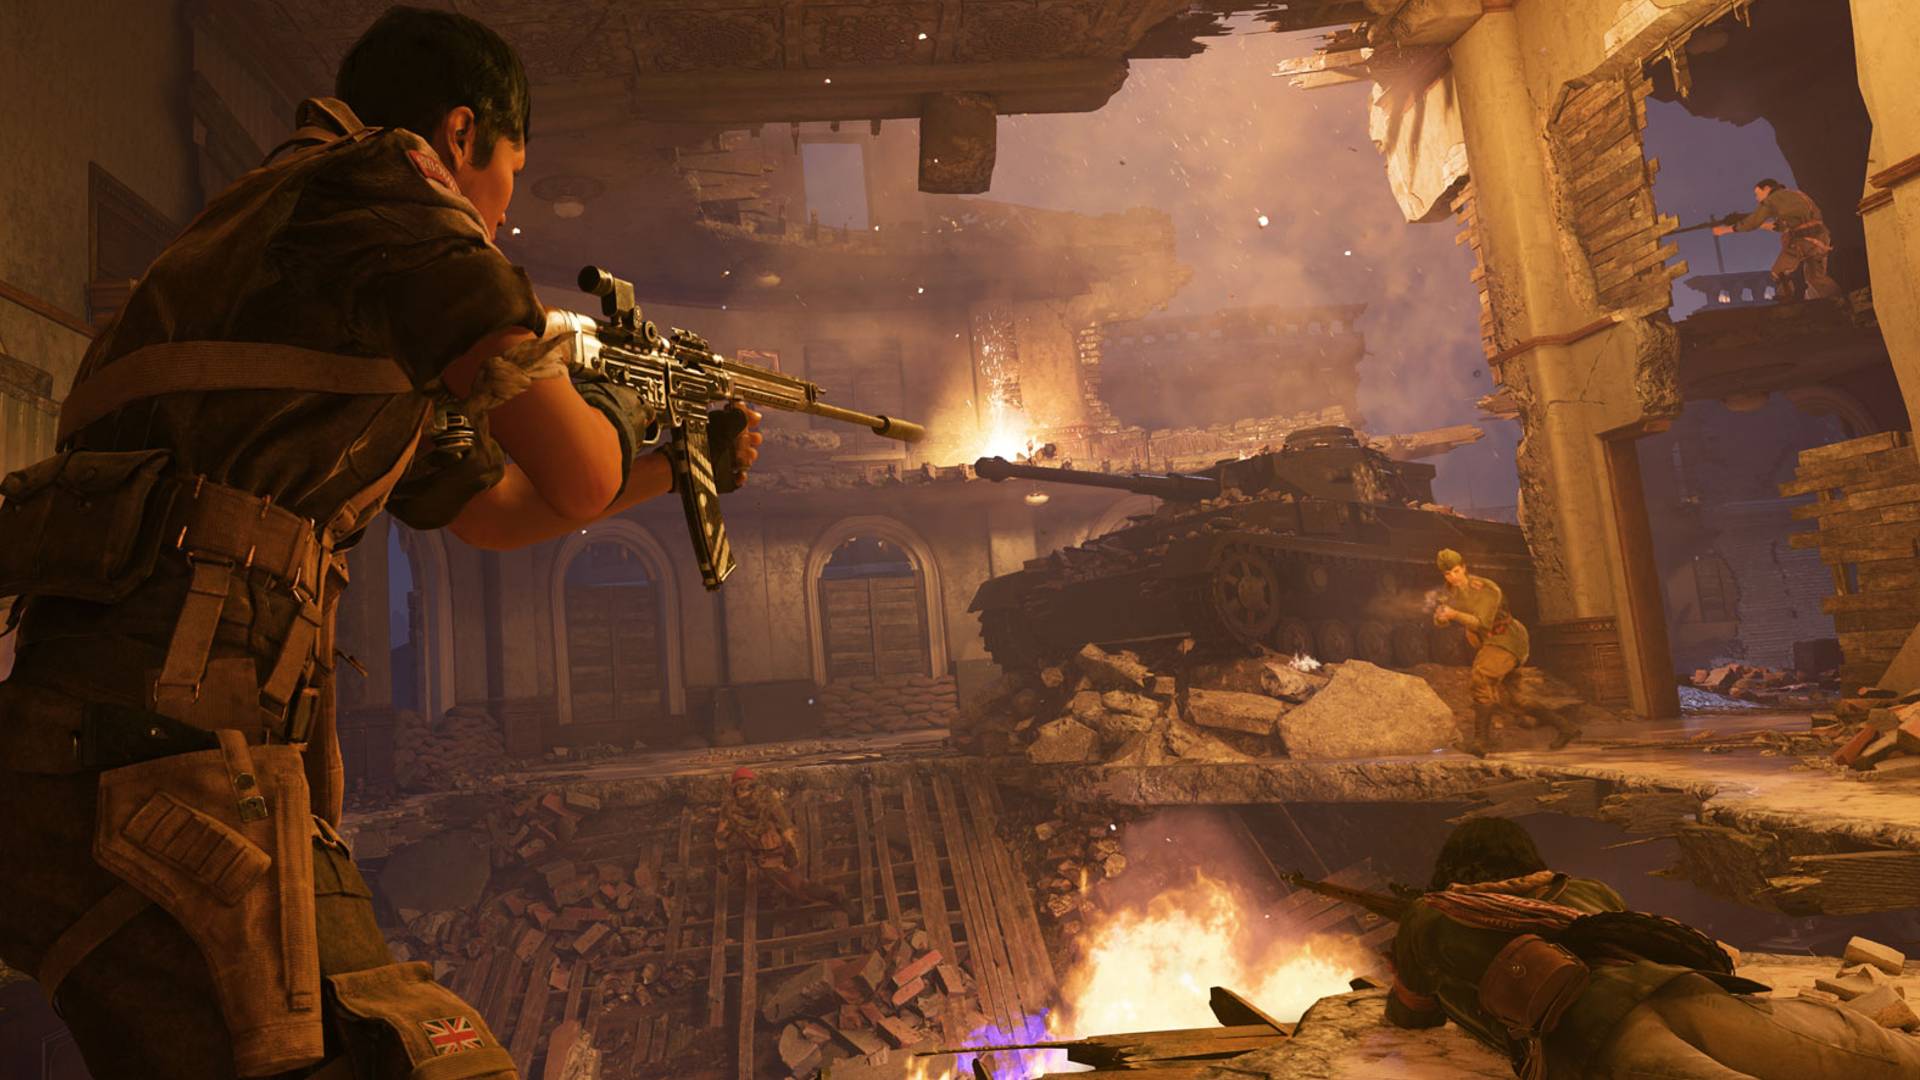 Call of Duty®: Vanguard Beta Guide – Tips for Maps, Modes, Weapons